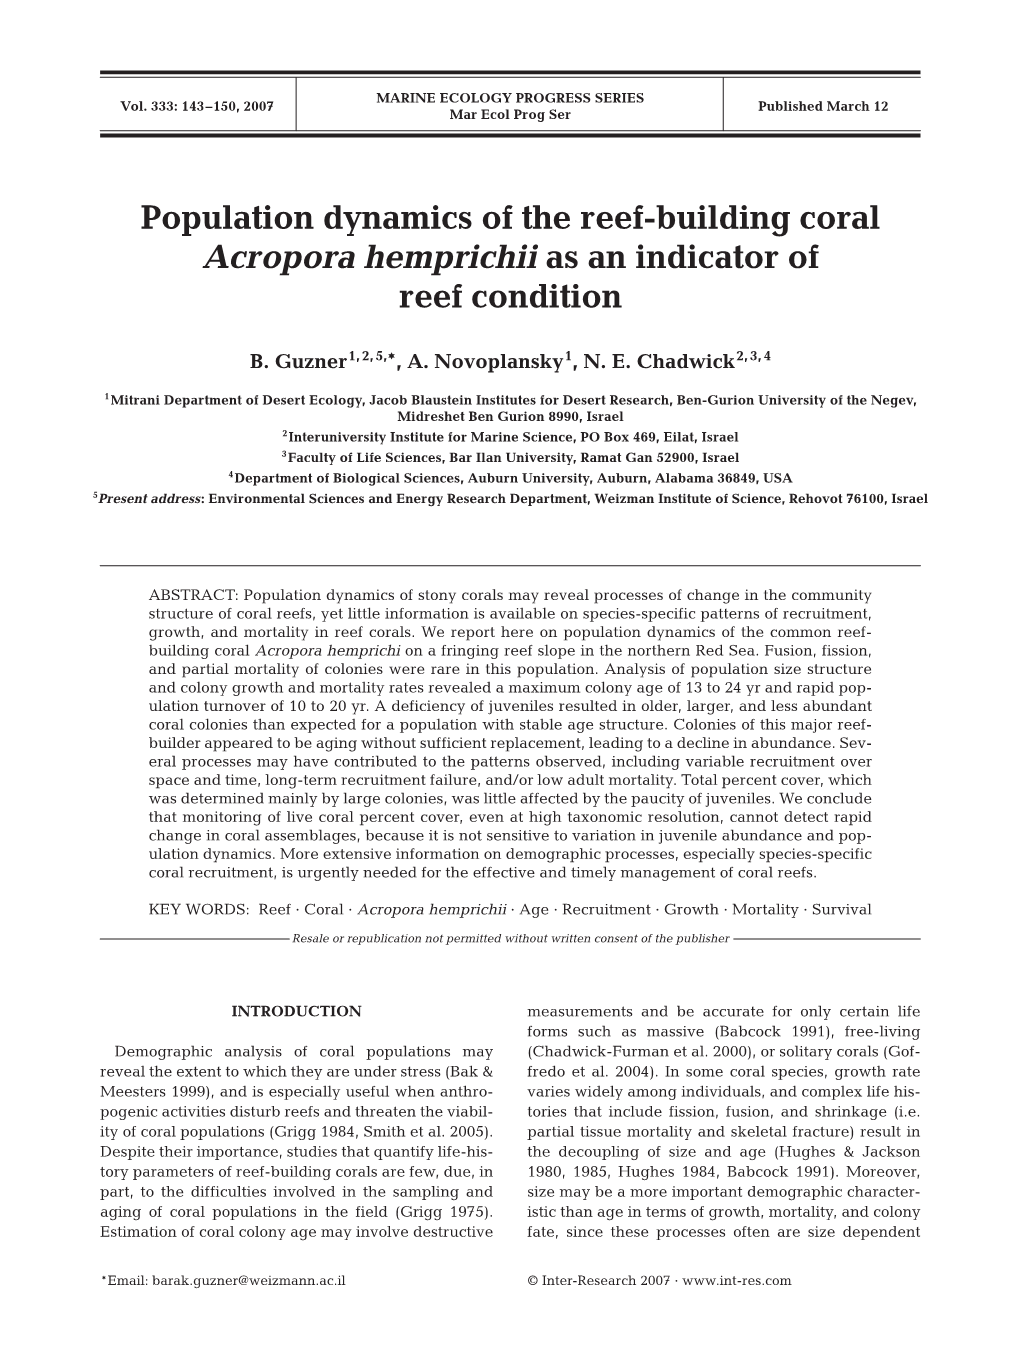 Population Dynamics of the Reef-Building Coral Acropora Hemprichii As an Indicator of Reef Condition